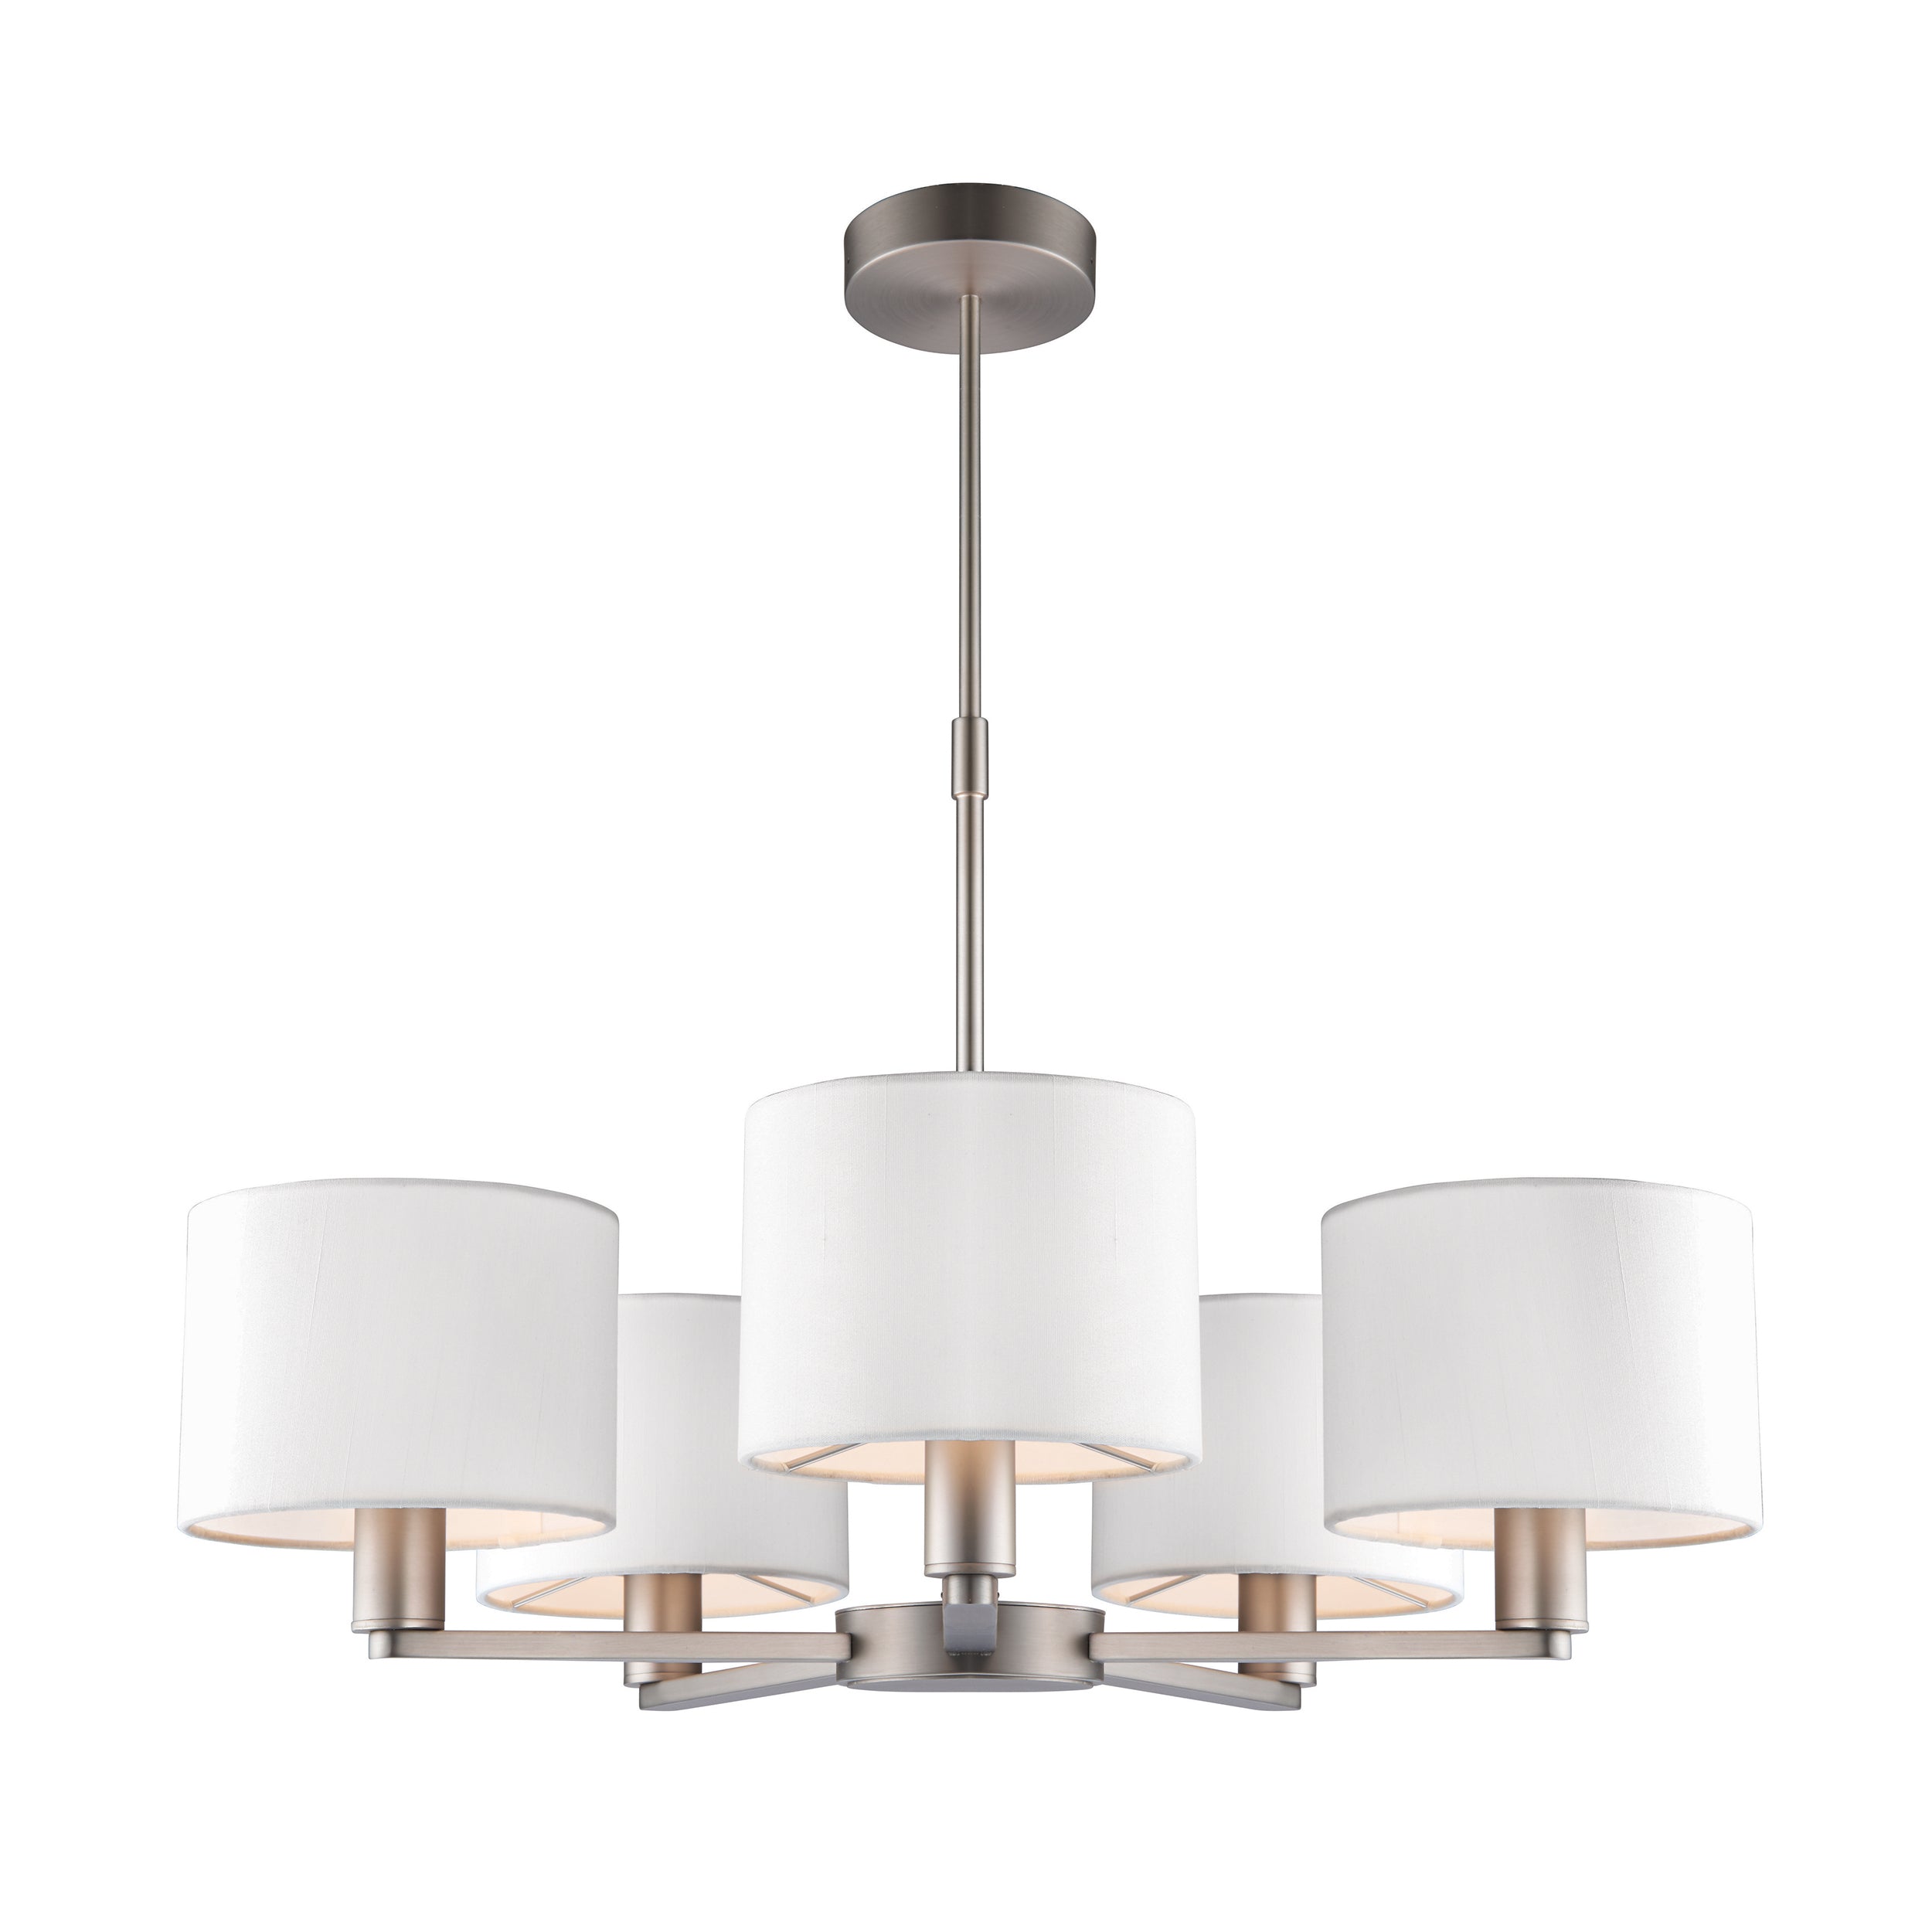 Daley 5 Light Pendant. Nickel With Vintage White Shades